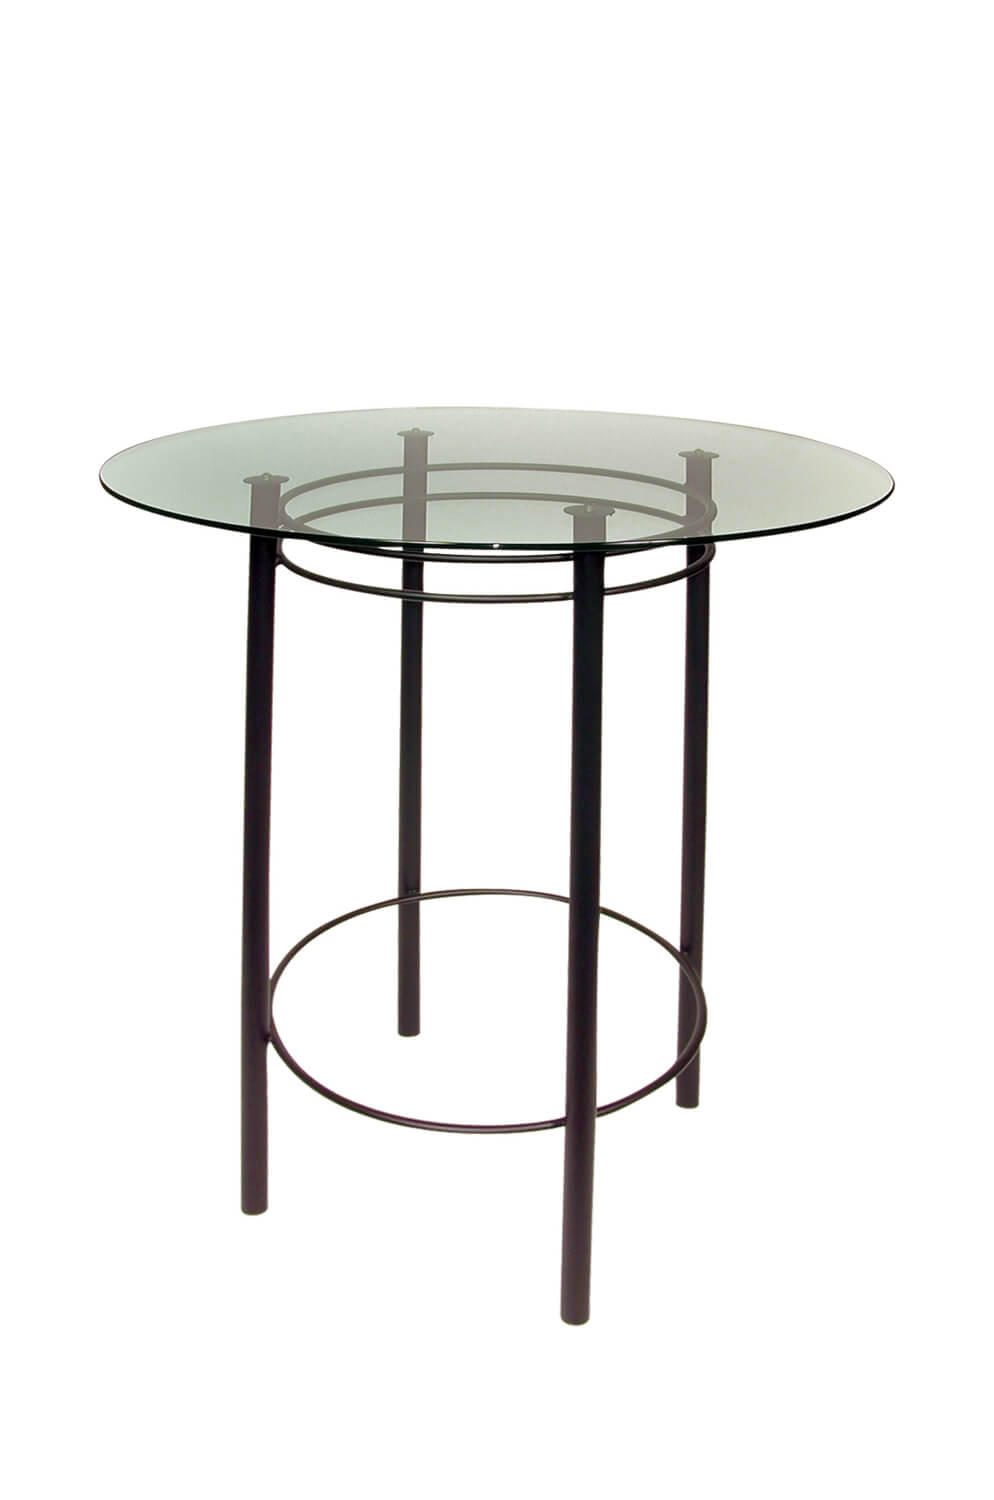 Trica S Astro Pub Table W Shatter, Round Table Bar Height